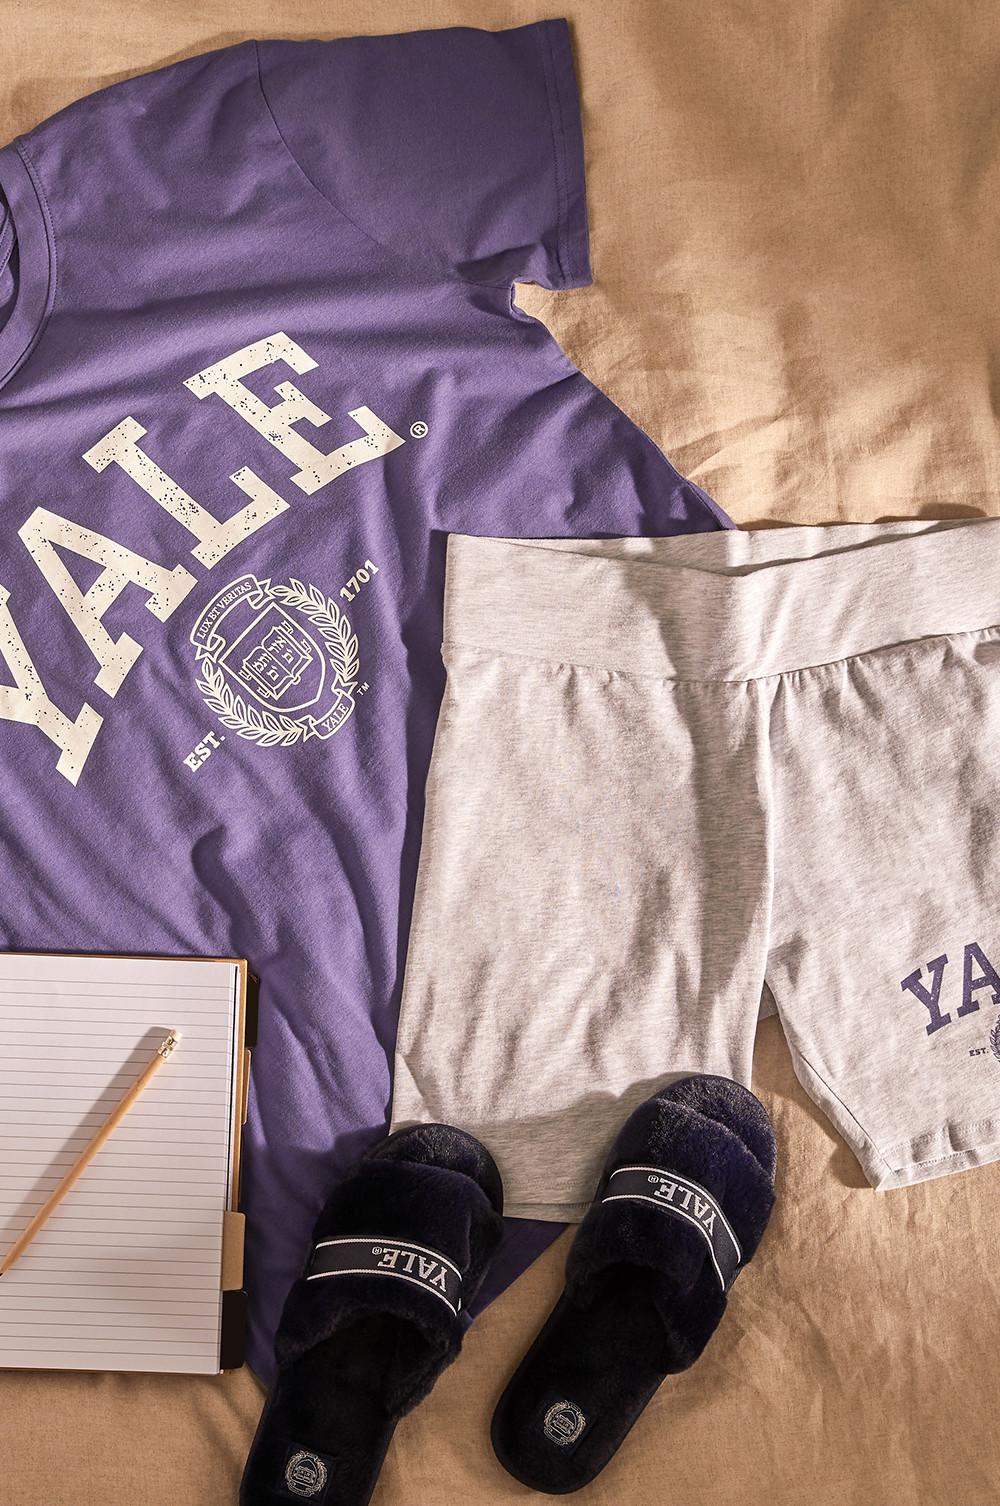 Flatlay of Yale pyjamas and accessories